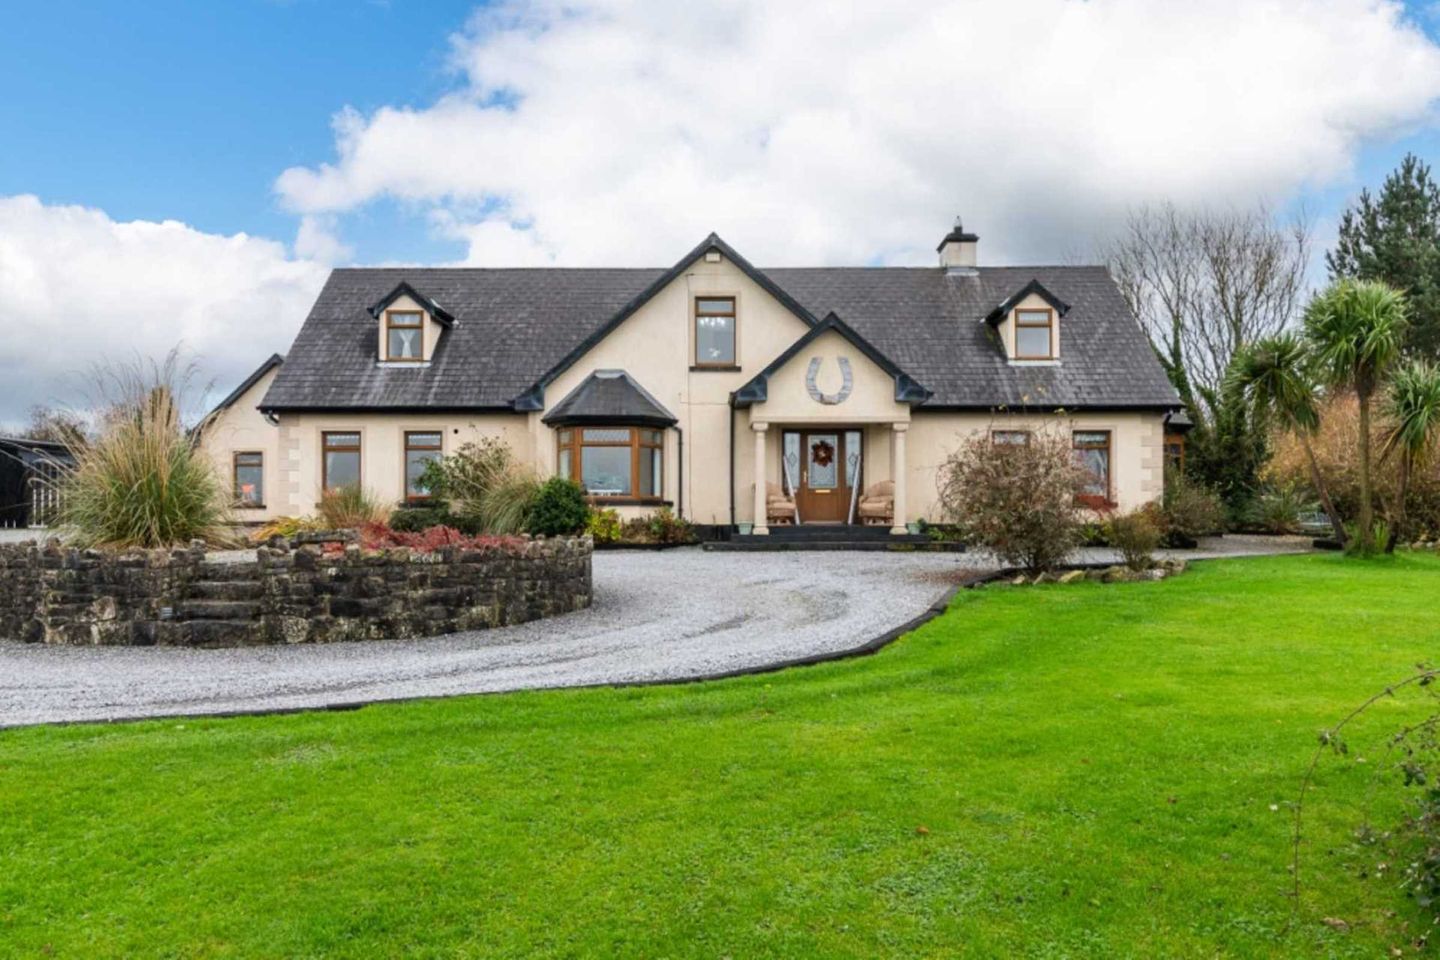 Residence & Stables on c. 1.20 Acres at Sunset View, Corbo, Kilrooskey, Co. Roscommon, F42AE63